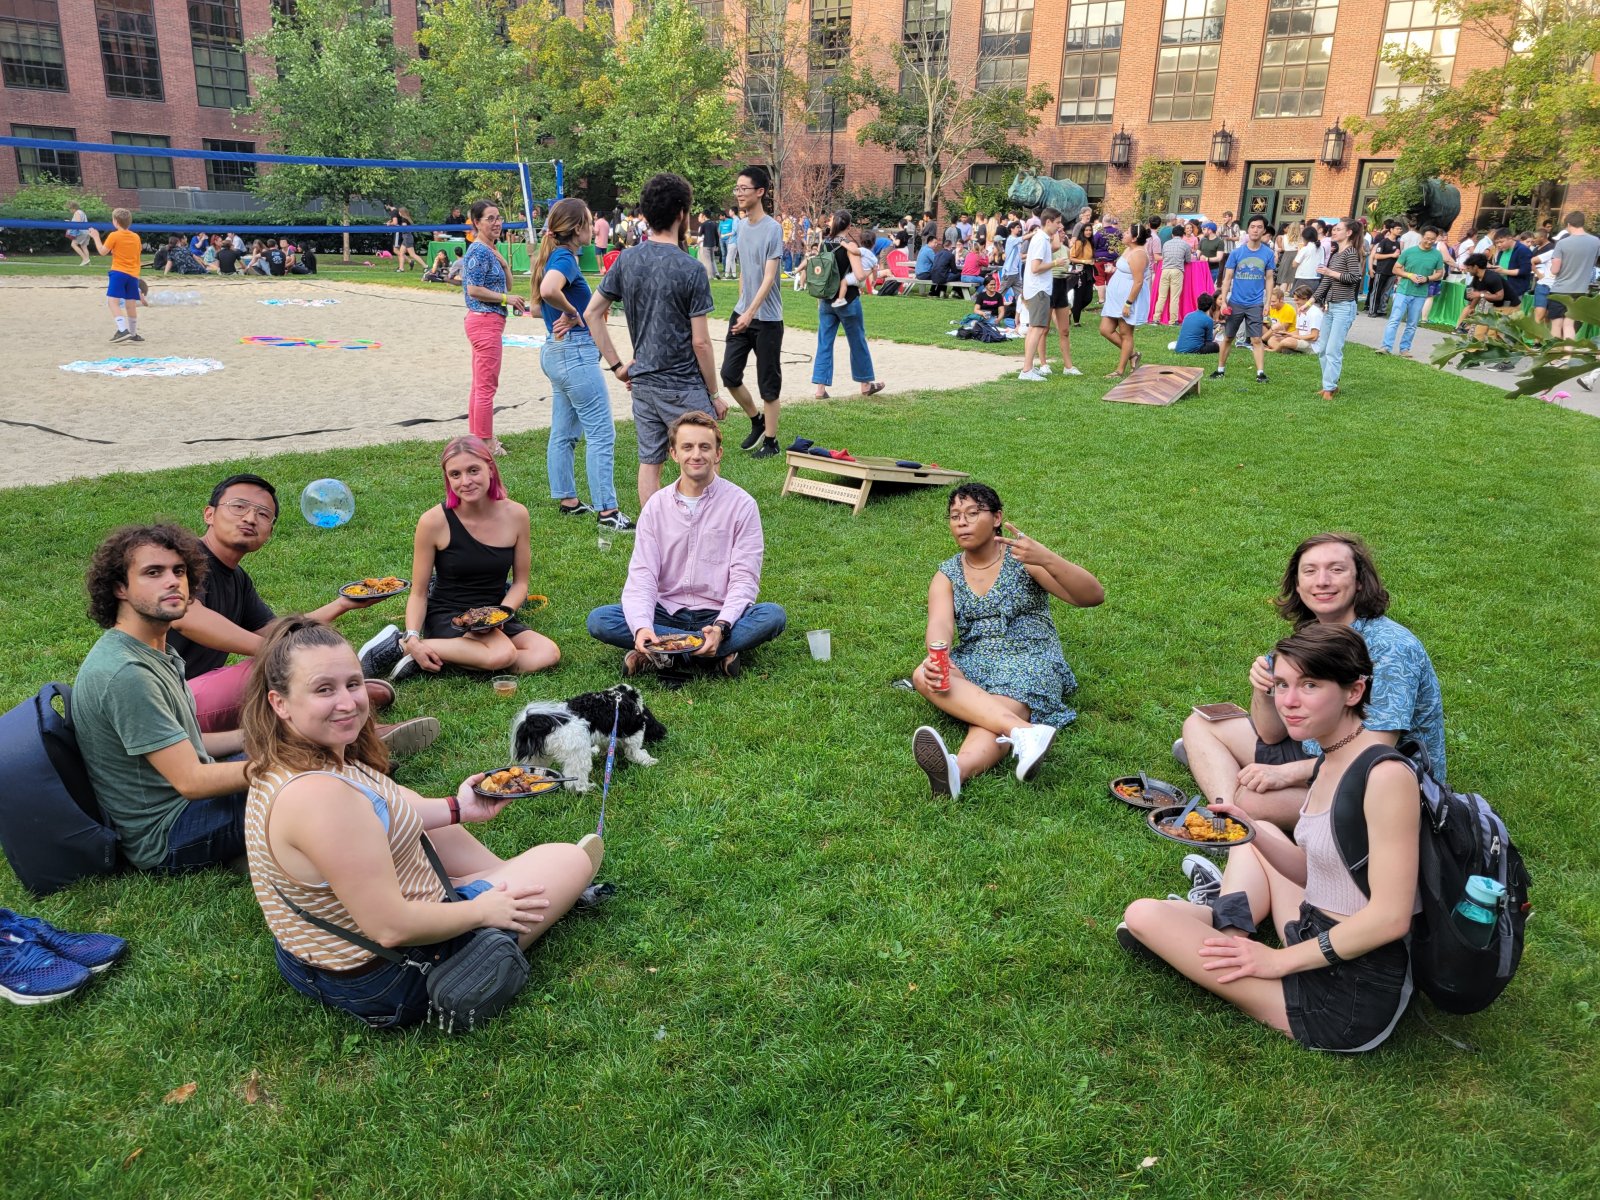 A group of people sitting on the grass